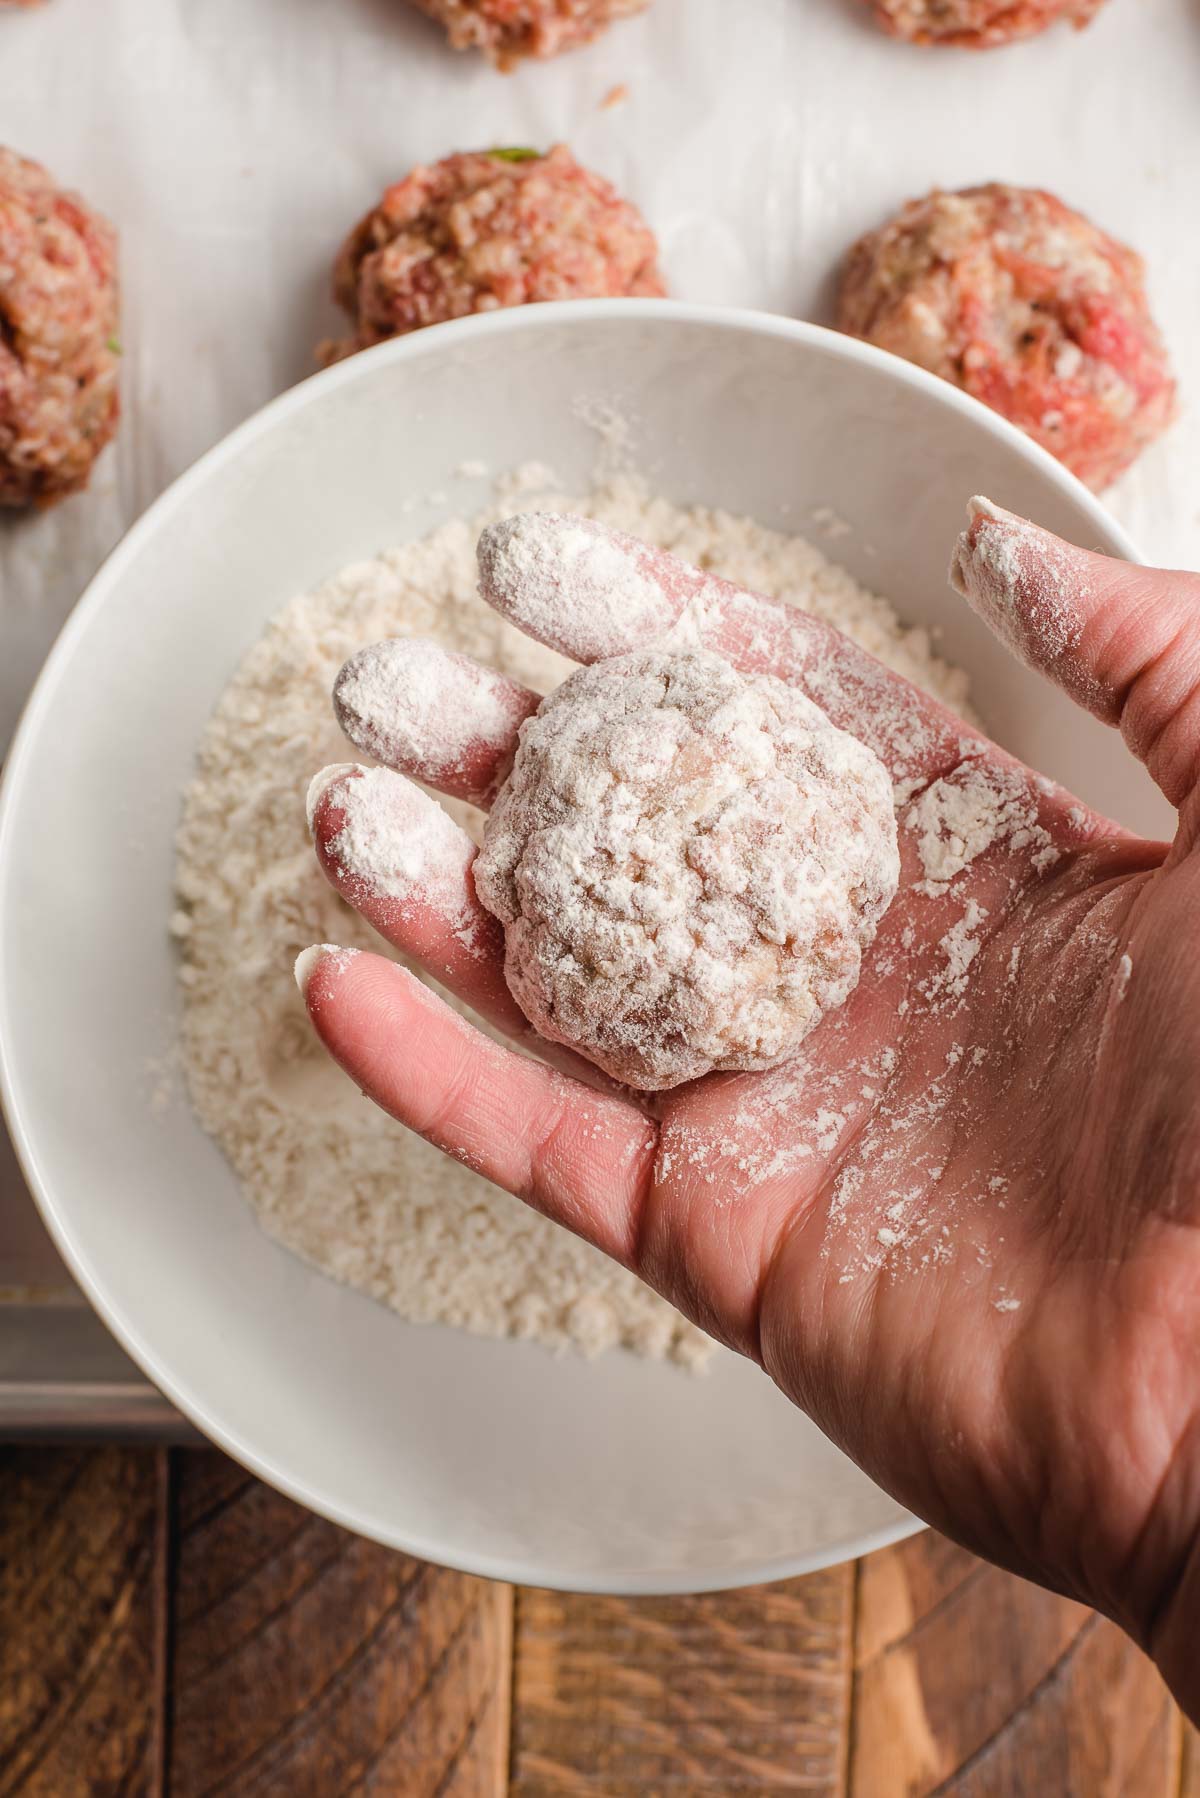 Hand holding a meatball dredged in flour before frying.